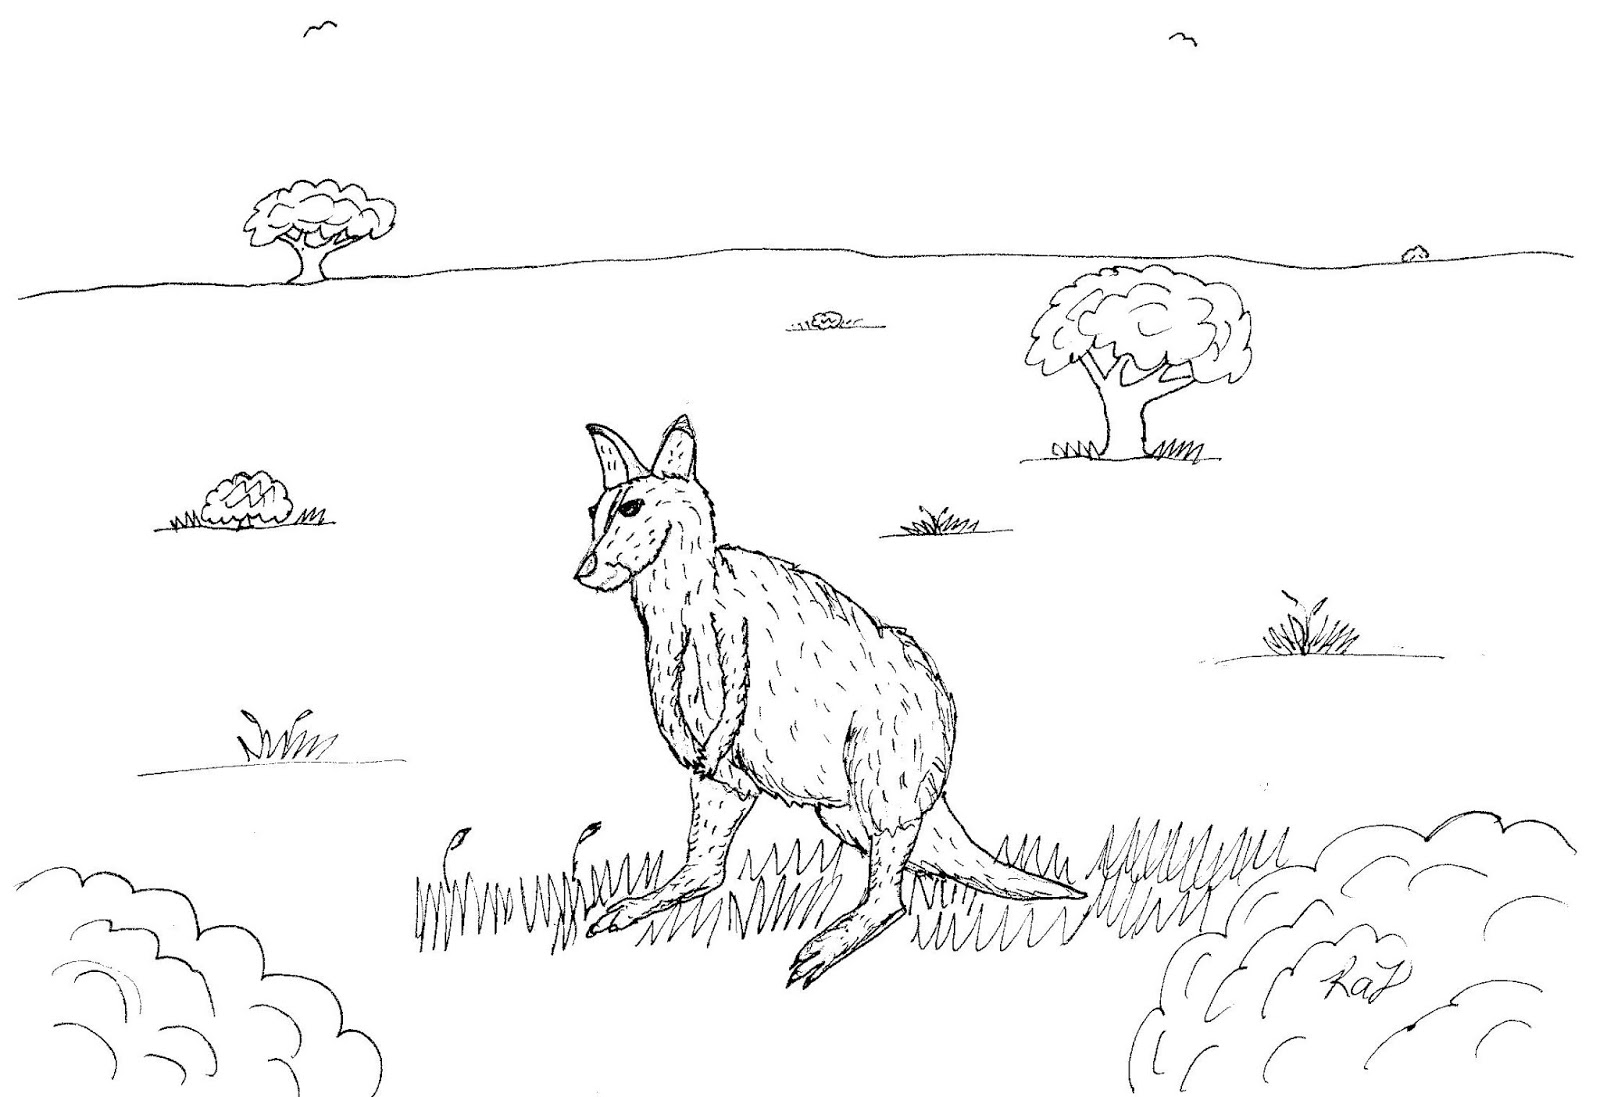 Download Robin's Great Coloring Pages: Wallaby